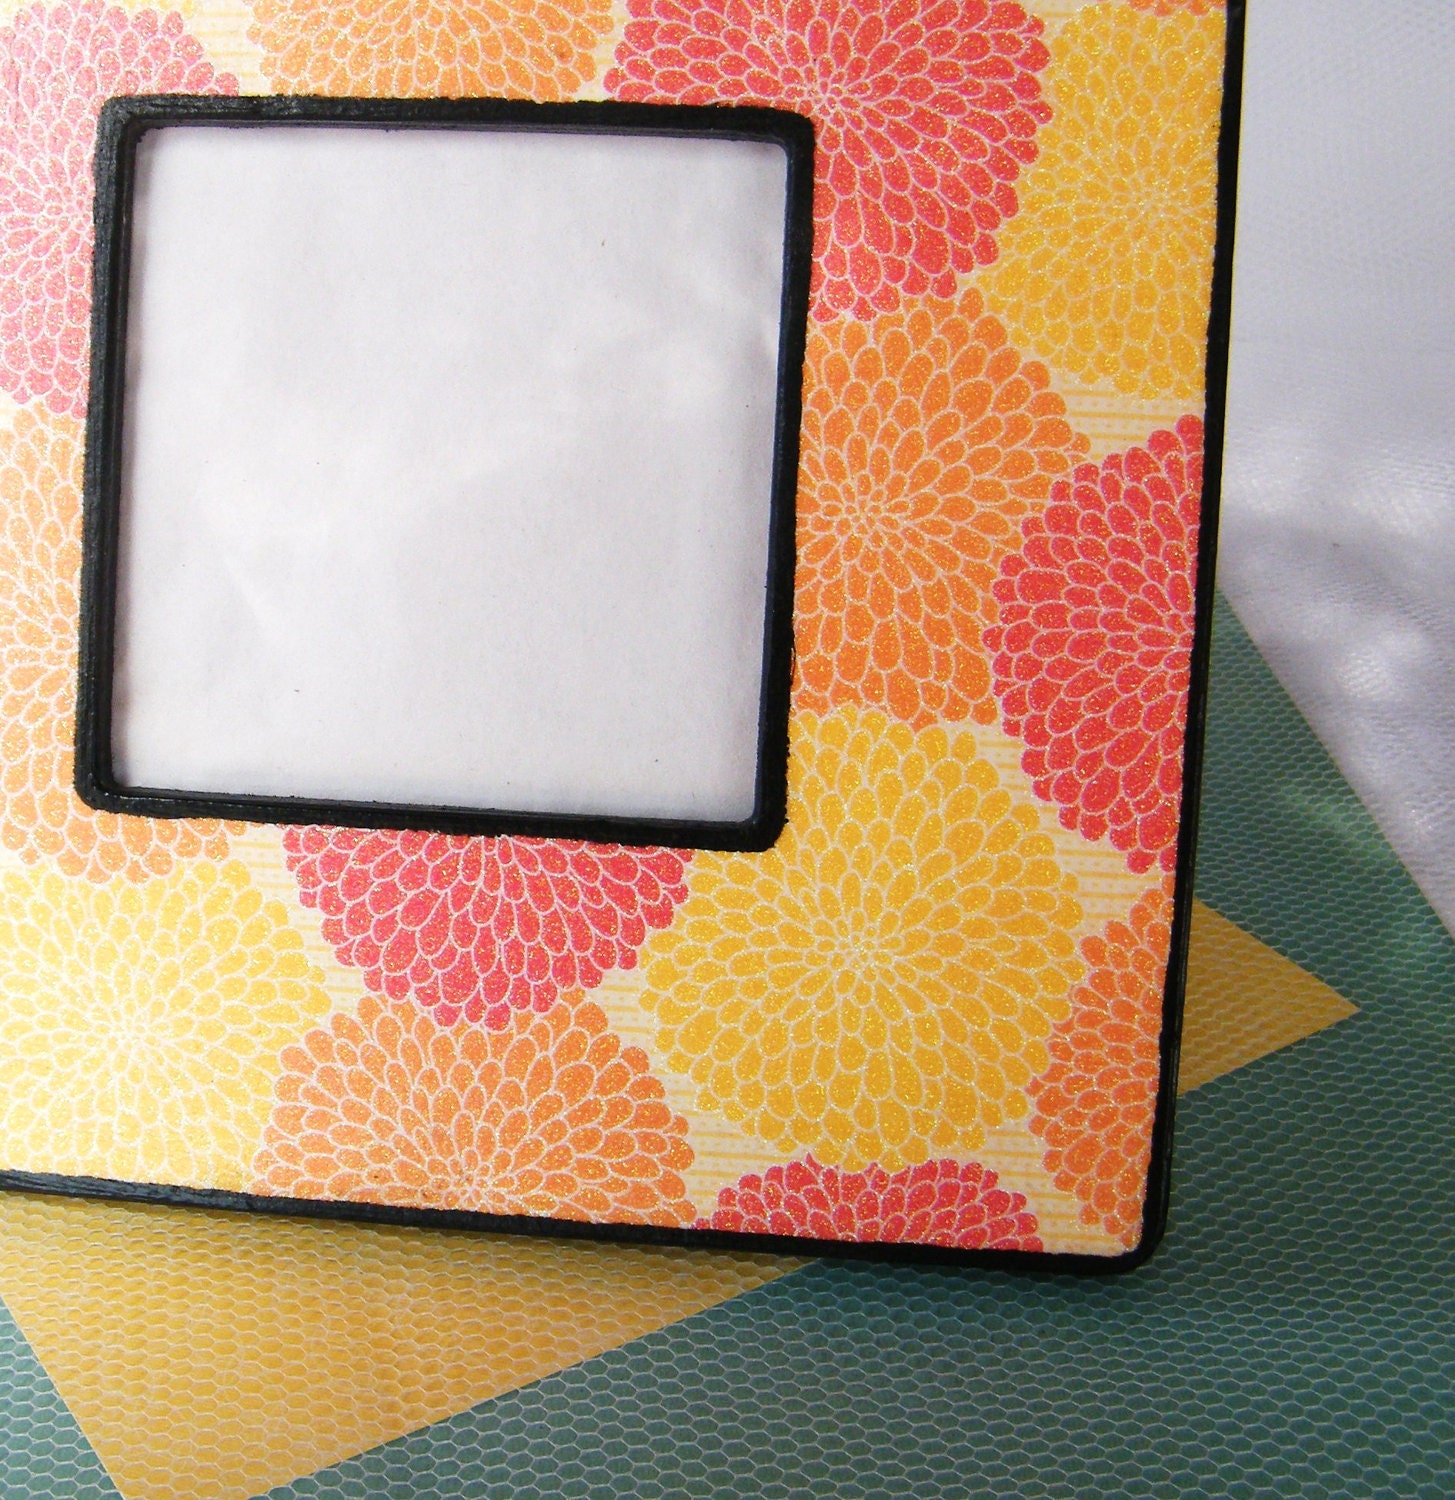 Glittery Fire Mums- Handpainted and Embellished Picture Frame, Red. Orange. Yellow. // LAST ONE